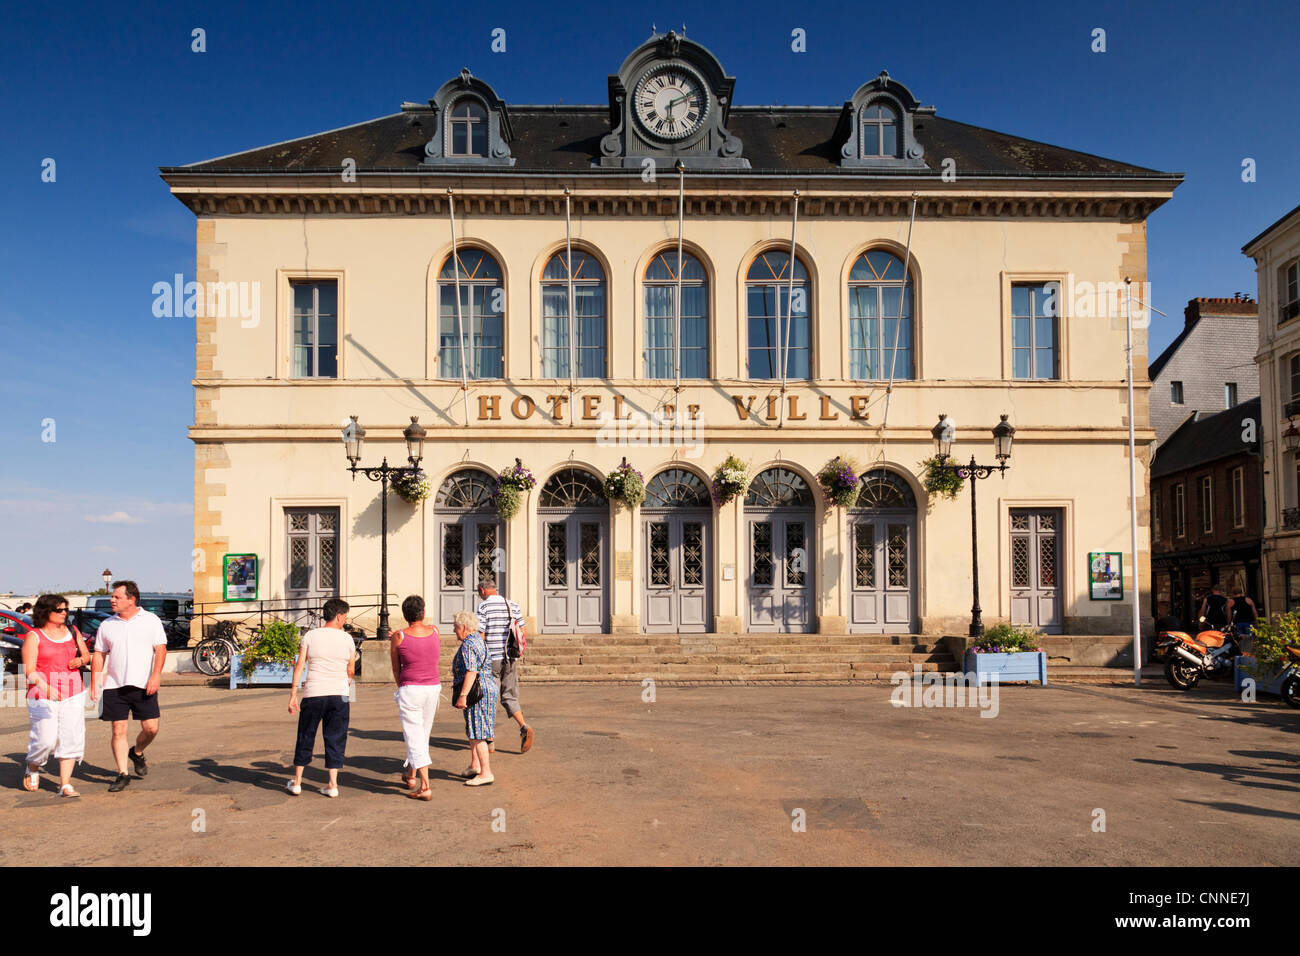 Hotel de Ville Honfleur Normandy France, people walking in the foreground. Stock Photo